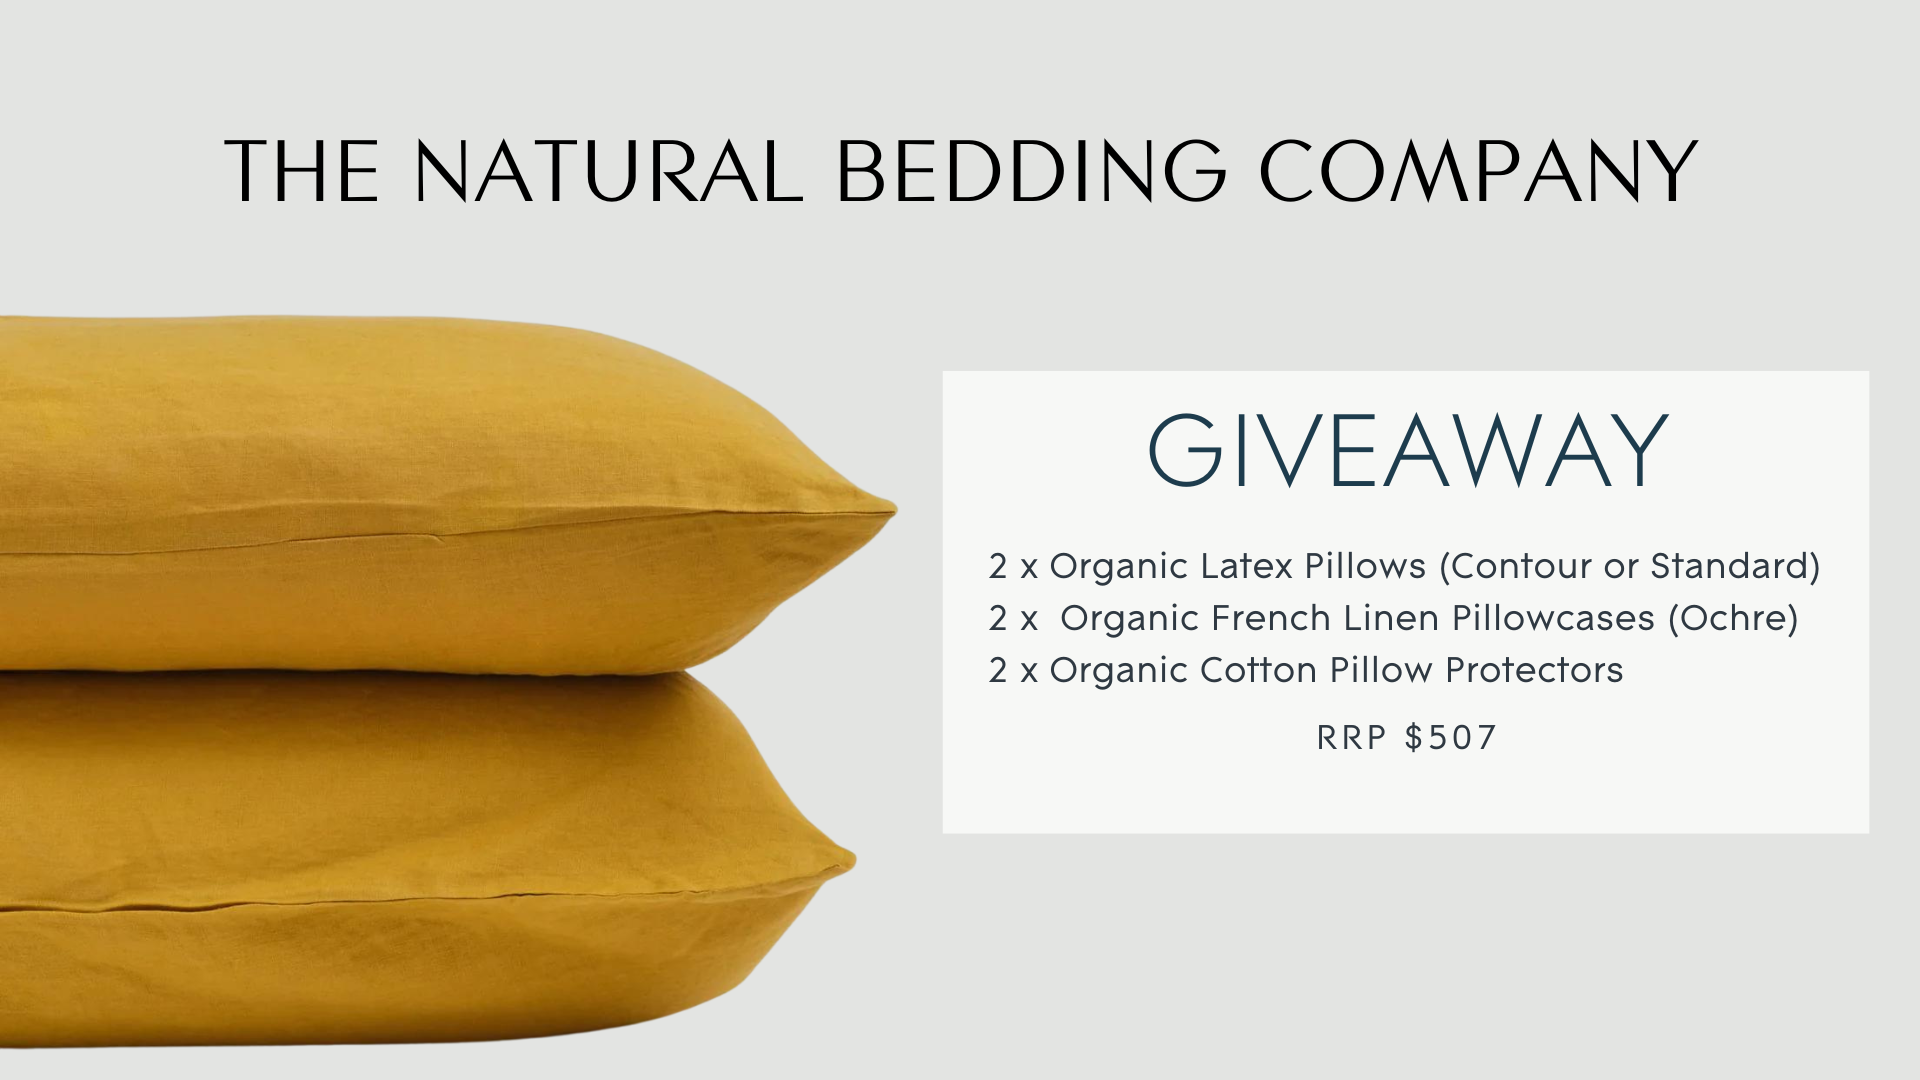 Giveaway: $507 Organic Pillow Bundle from The Natural Bedding Company